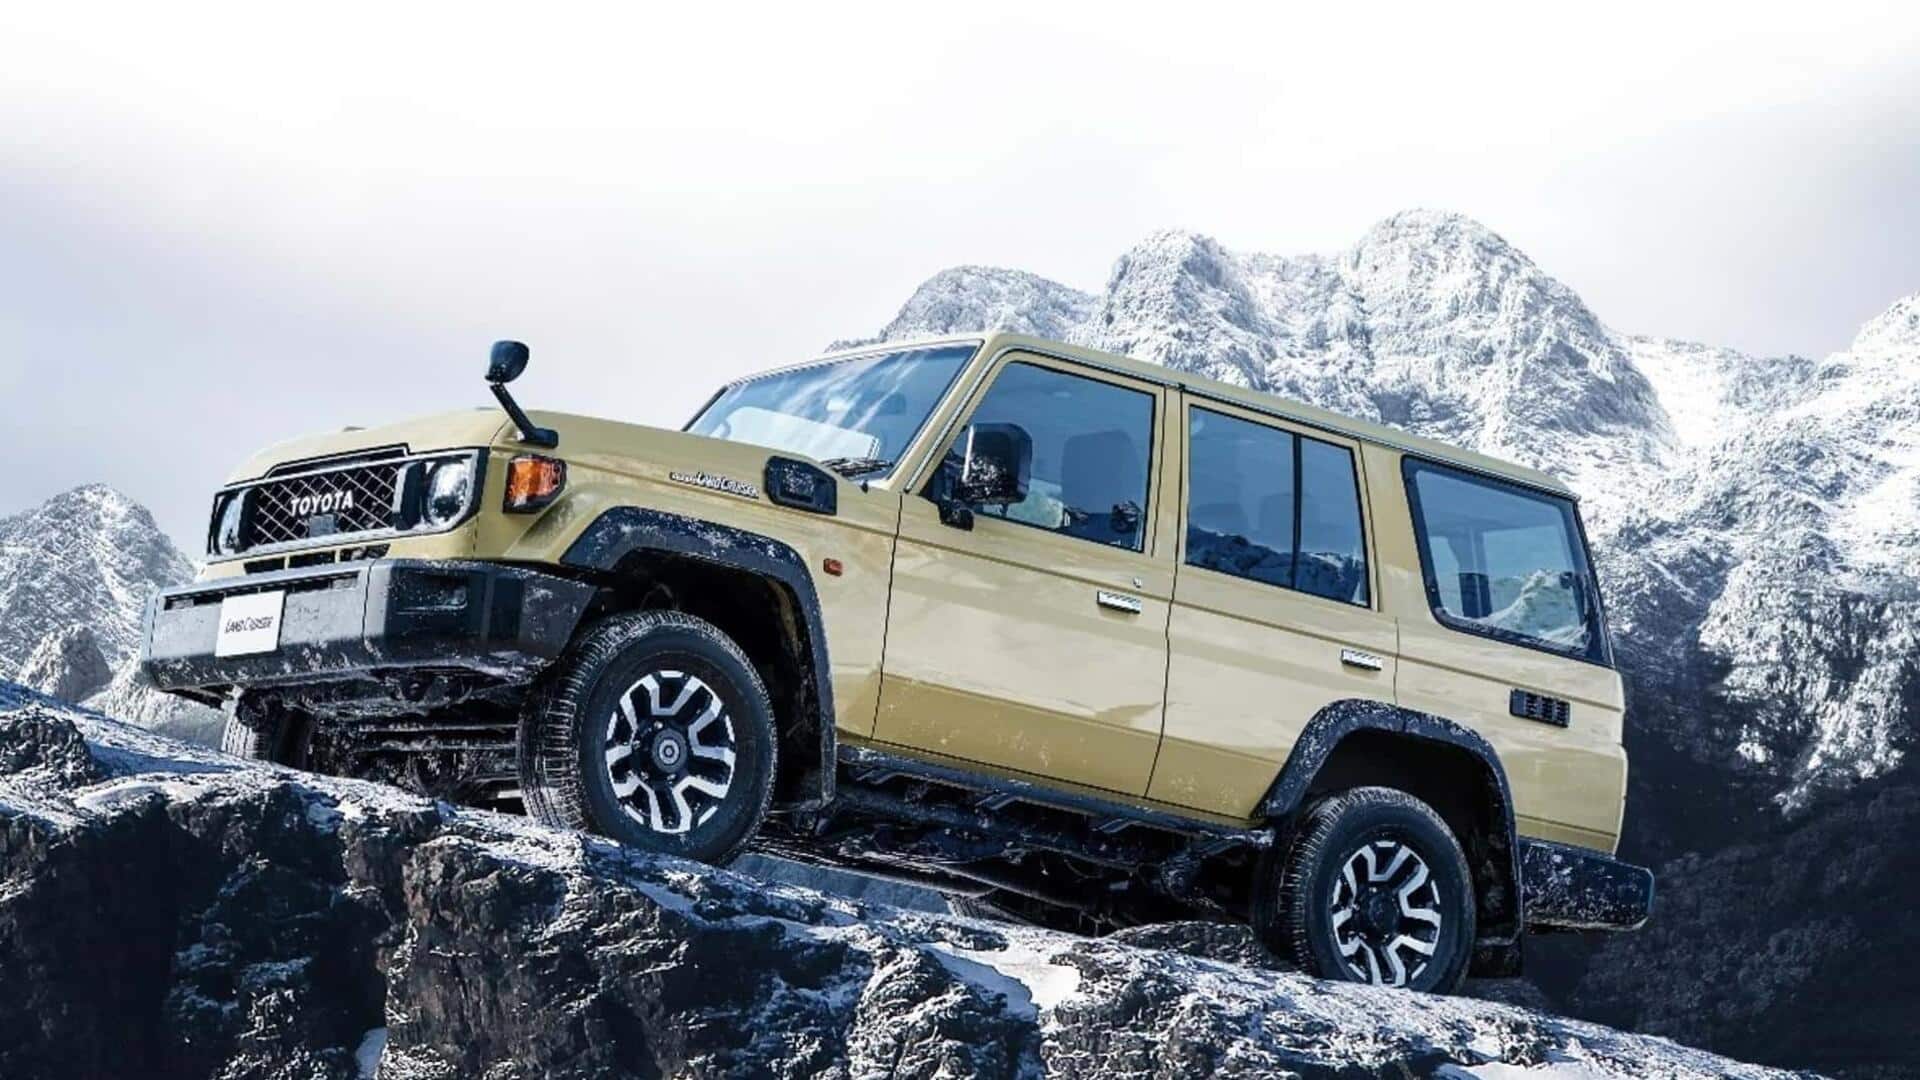 Toyota relaunches iconic Land Cruiser 70 model: Check features